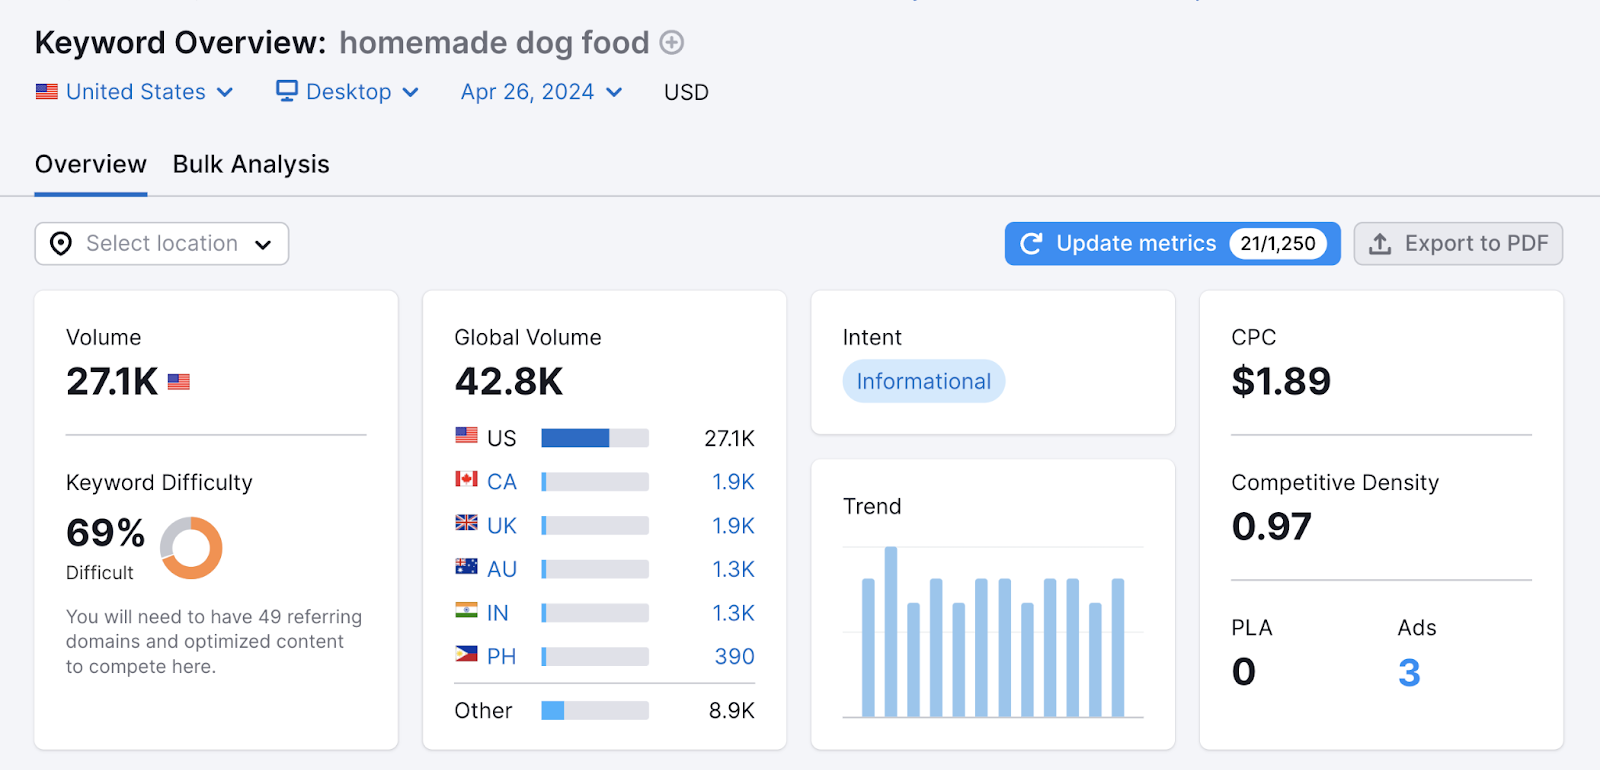 Homemade dog food has 27.1k monthly search volume, 69% keyword difficulty, informational search intent, and other data